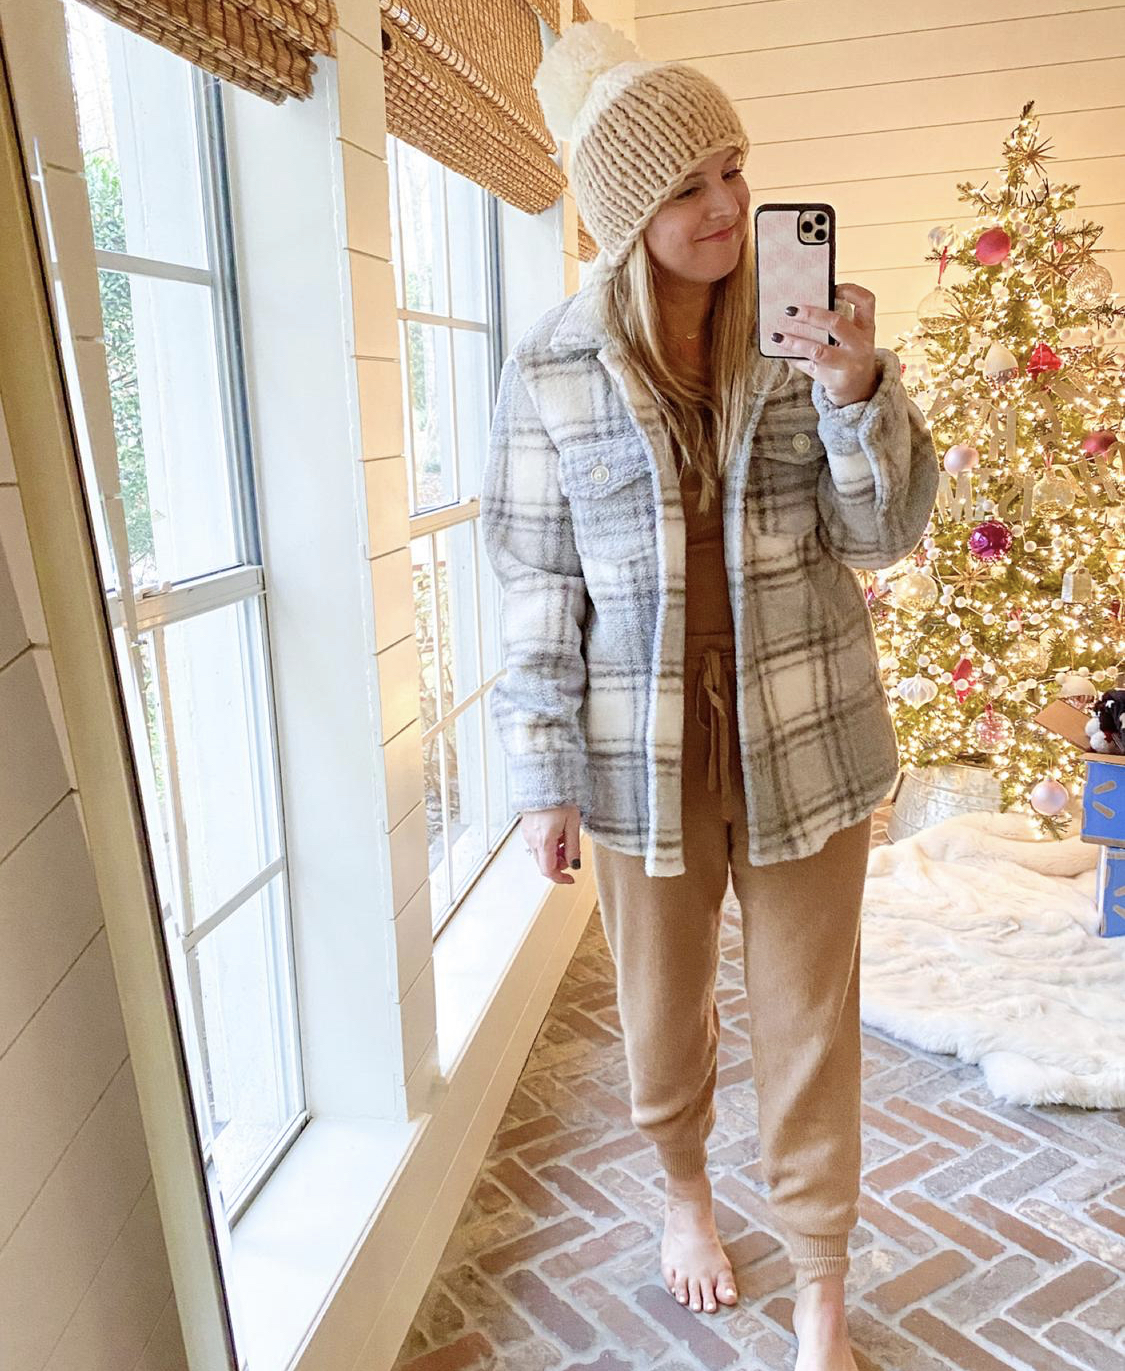 December Outfits by popular Houston fashion blog, Fancy Ashley: image of a woman standing in front of a Christmas tree decorated with pink, white and silver ornaments and wearing a tan and white pom beaning, tan sweater set, and grey and white plaid fleece jacket. 